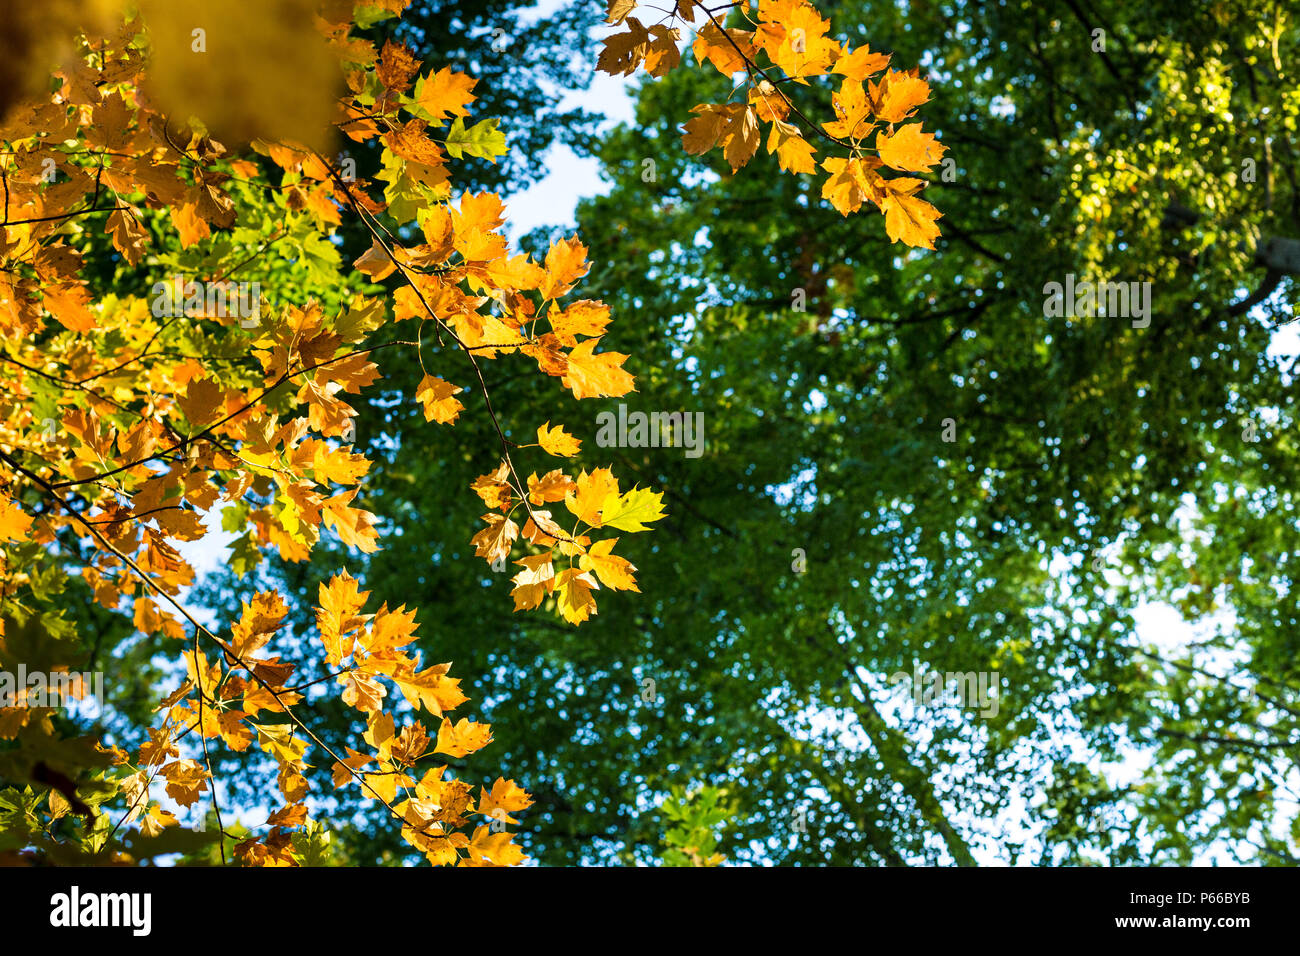 Looking up into maple tree as the leaves are changing colour from green to yellow and orange in autumn, Luxembourg, Central Europe Stock Photo